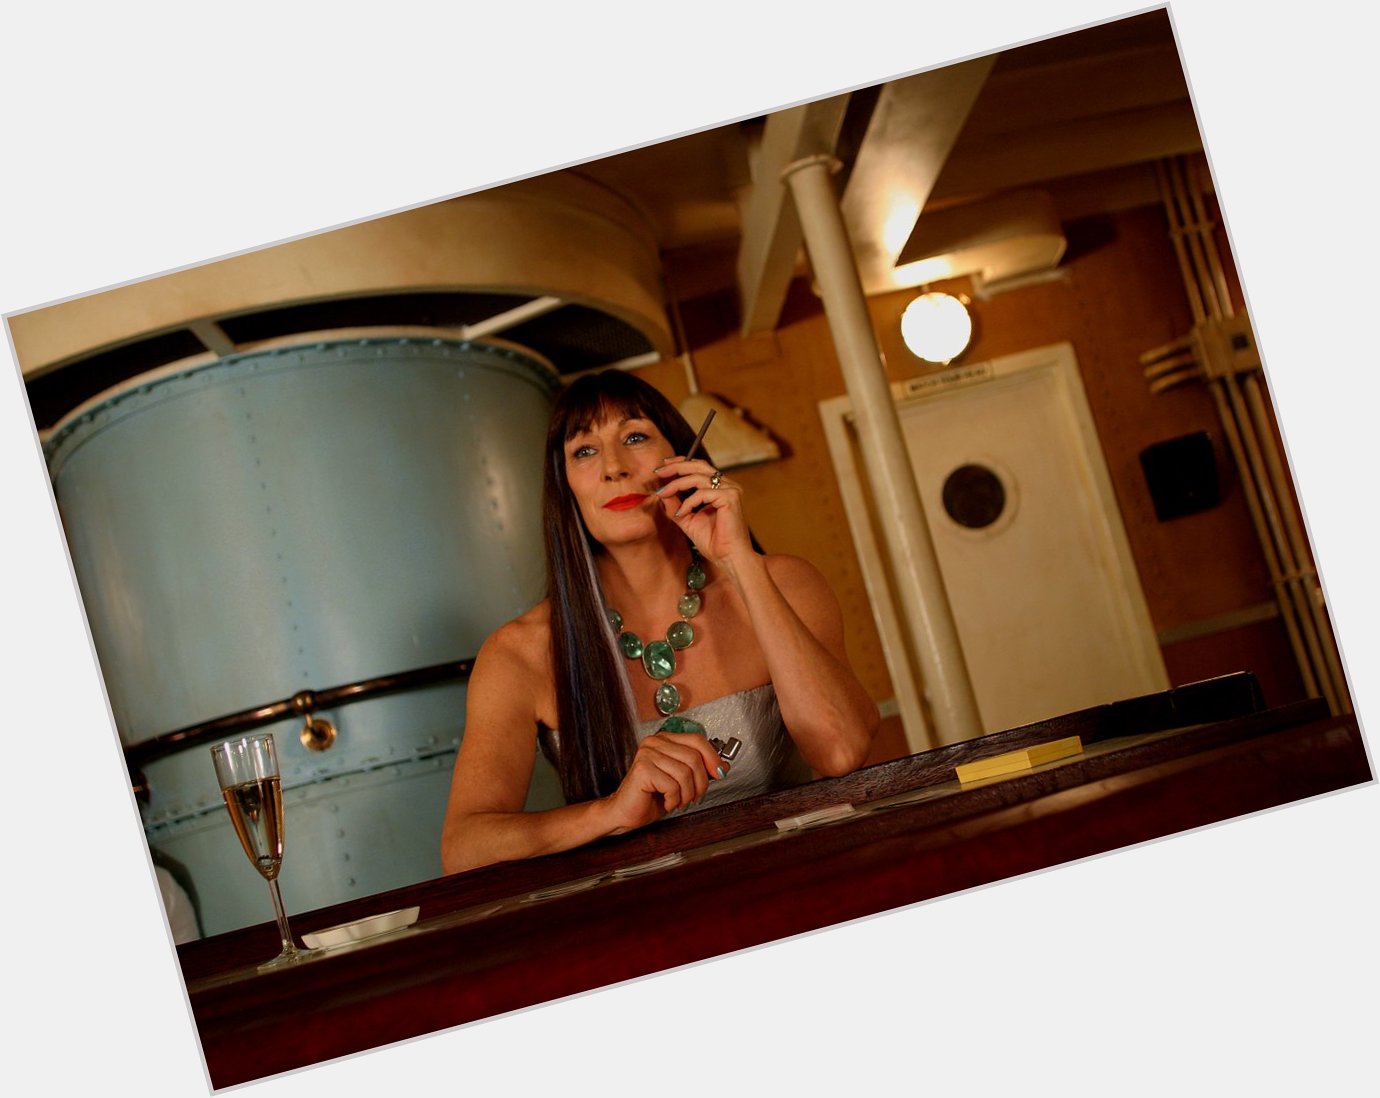 Happy birthday to the fabulous Anjelica Huston, seen here in THE LIFE AQUATIC WITH STEVE ZISSOU (2004)  